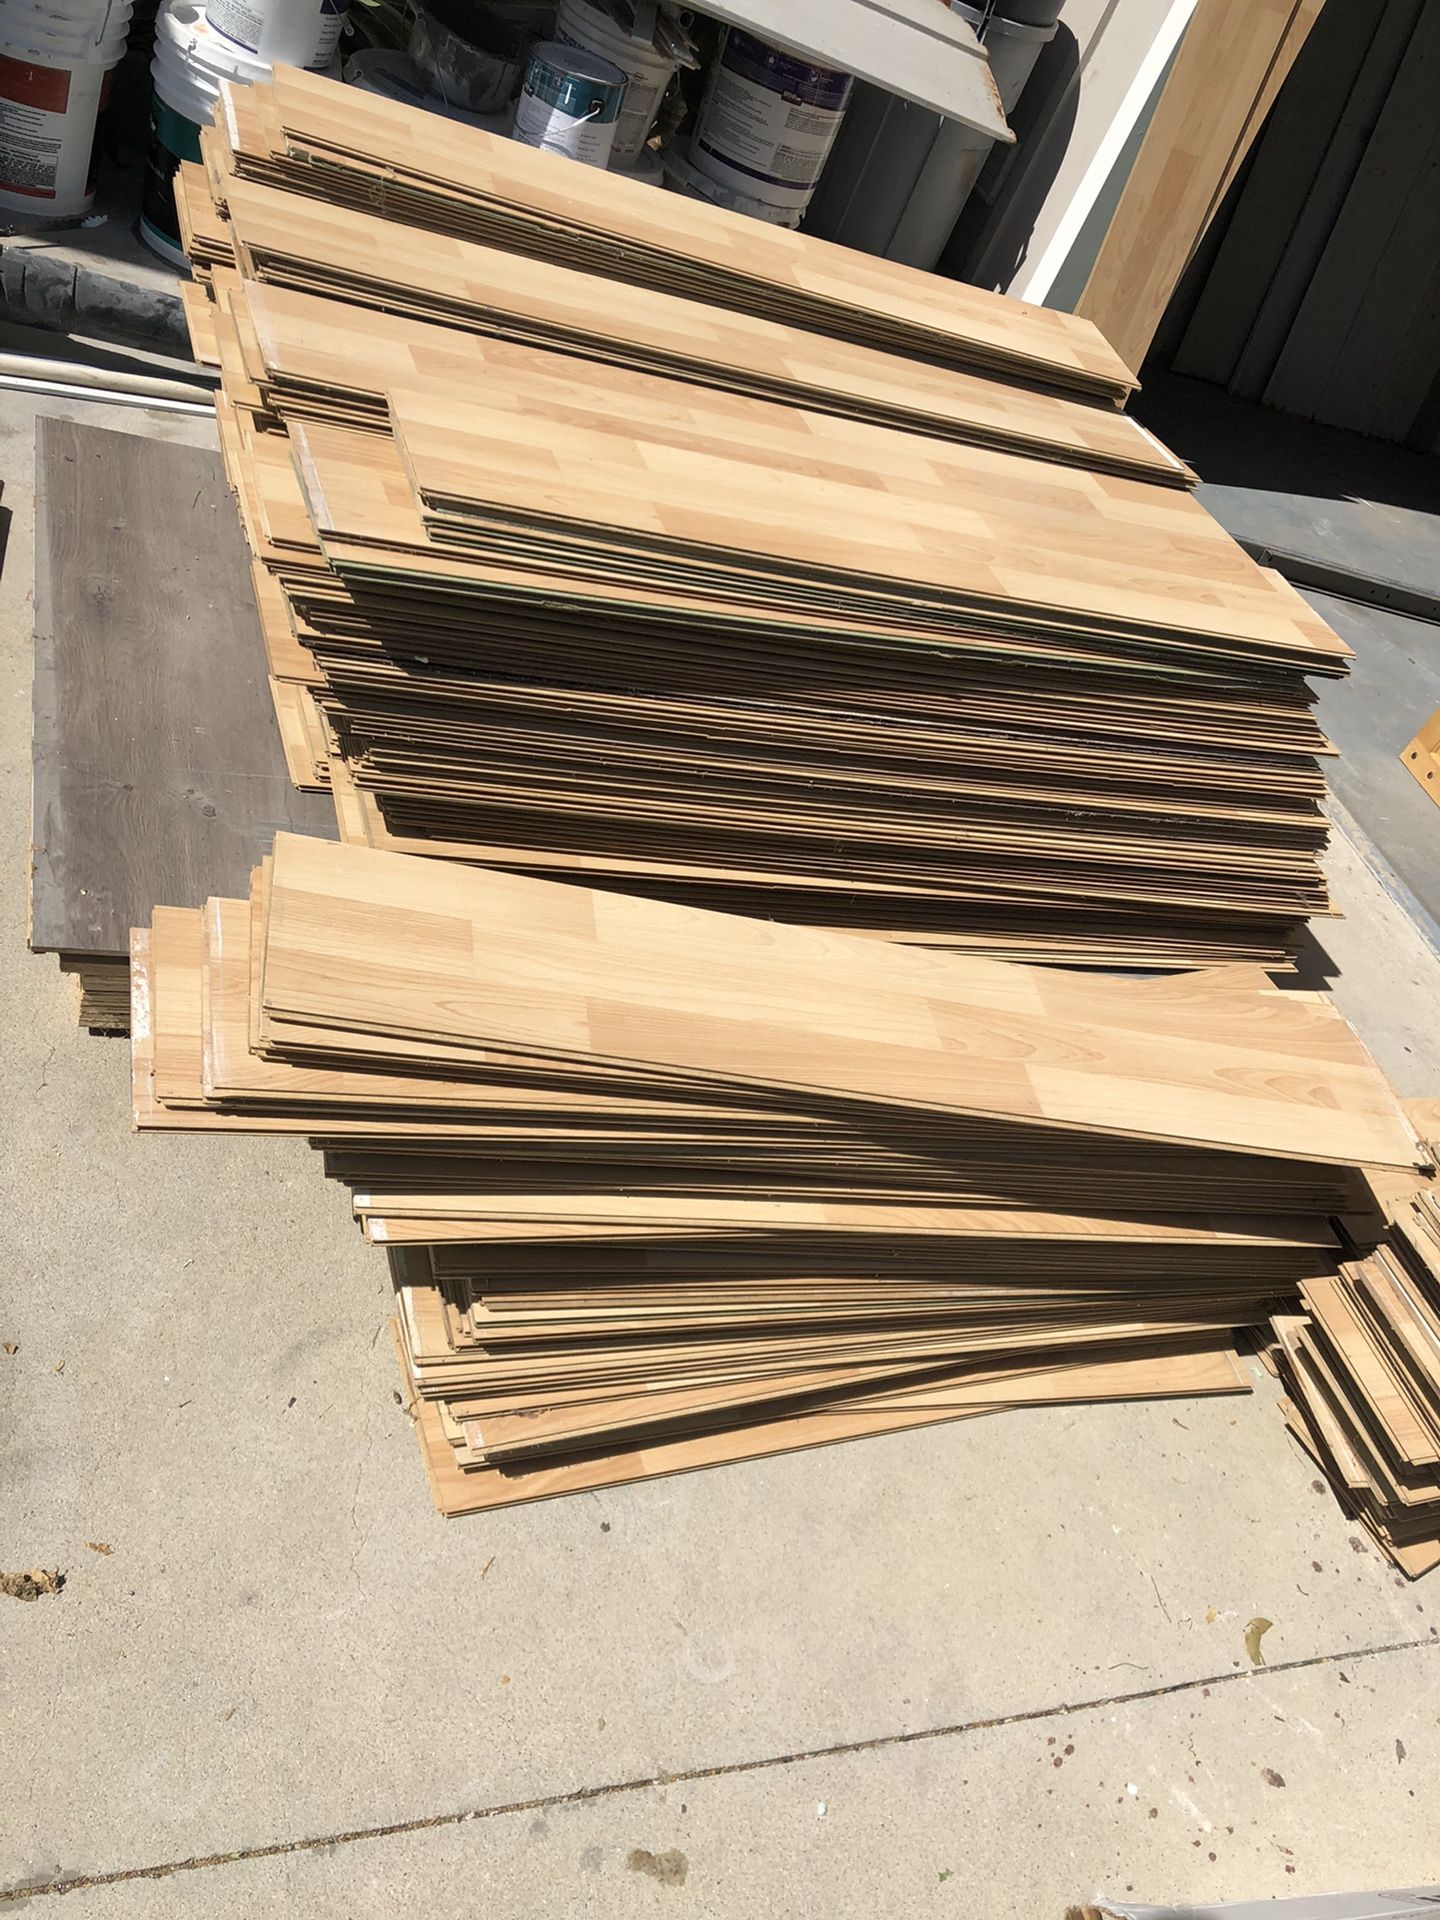 Almosr free over 1000 sq ft laminated wood $100 today only